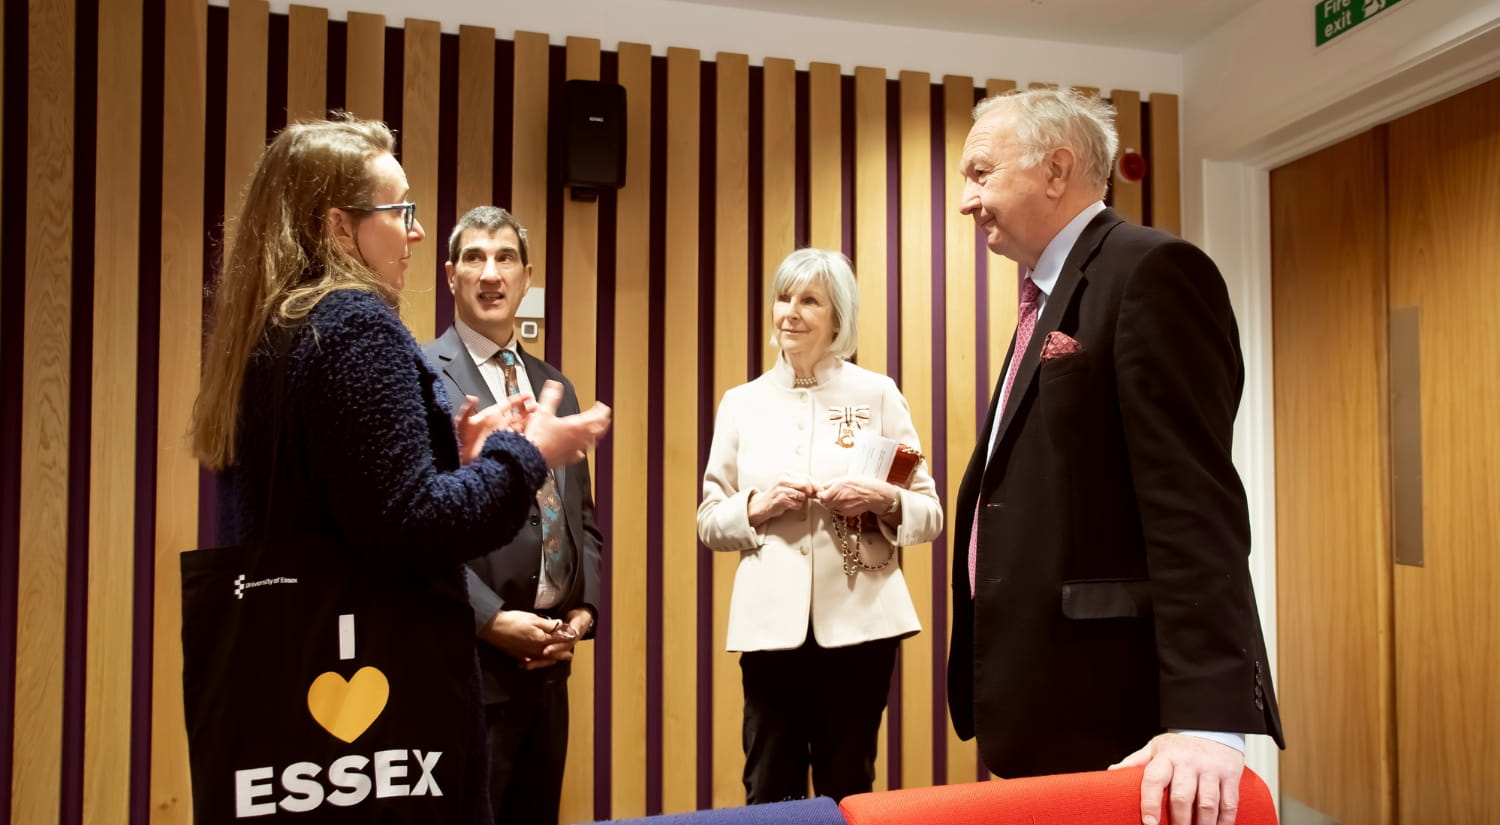 The Lord-Lieutenant of Essex and husband Philip Tolhurst in discussion with Vice-Chancellor Professor Anthony Forster and Southend Campus Manager Zoe Manning